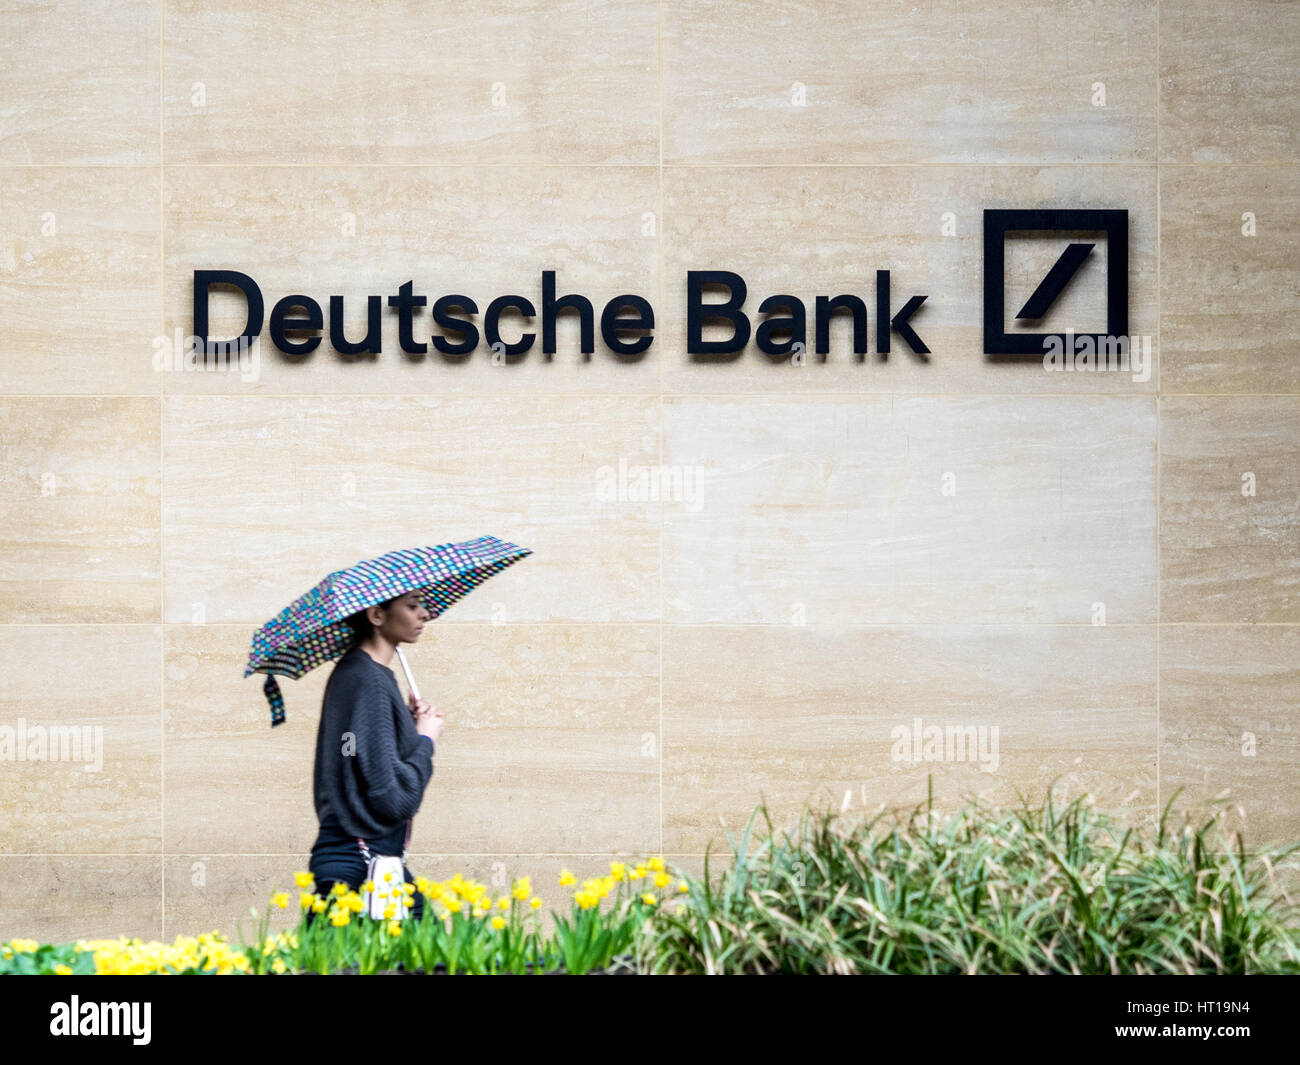 Deutsche Bank London - a woman walk past the London offices of Deutsche Bank in the Square Mile, London's Financial District. Stock Photo